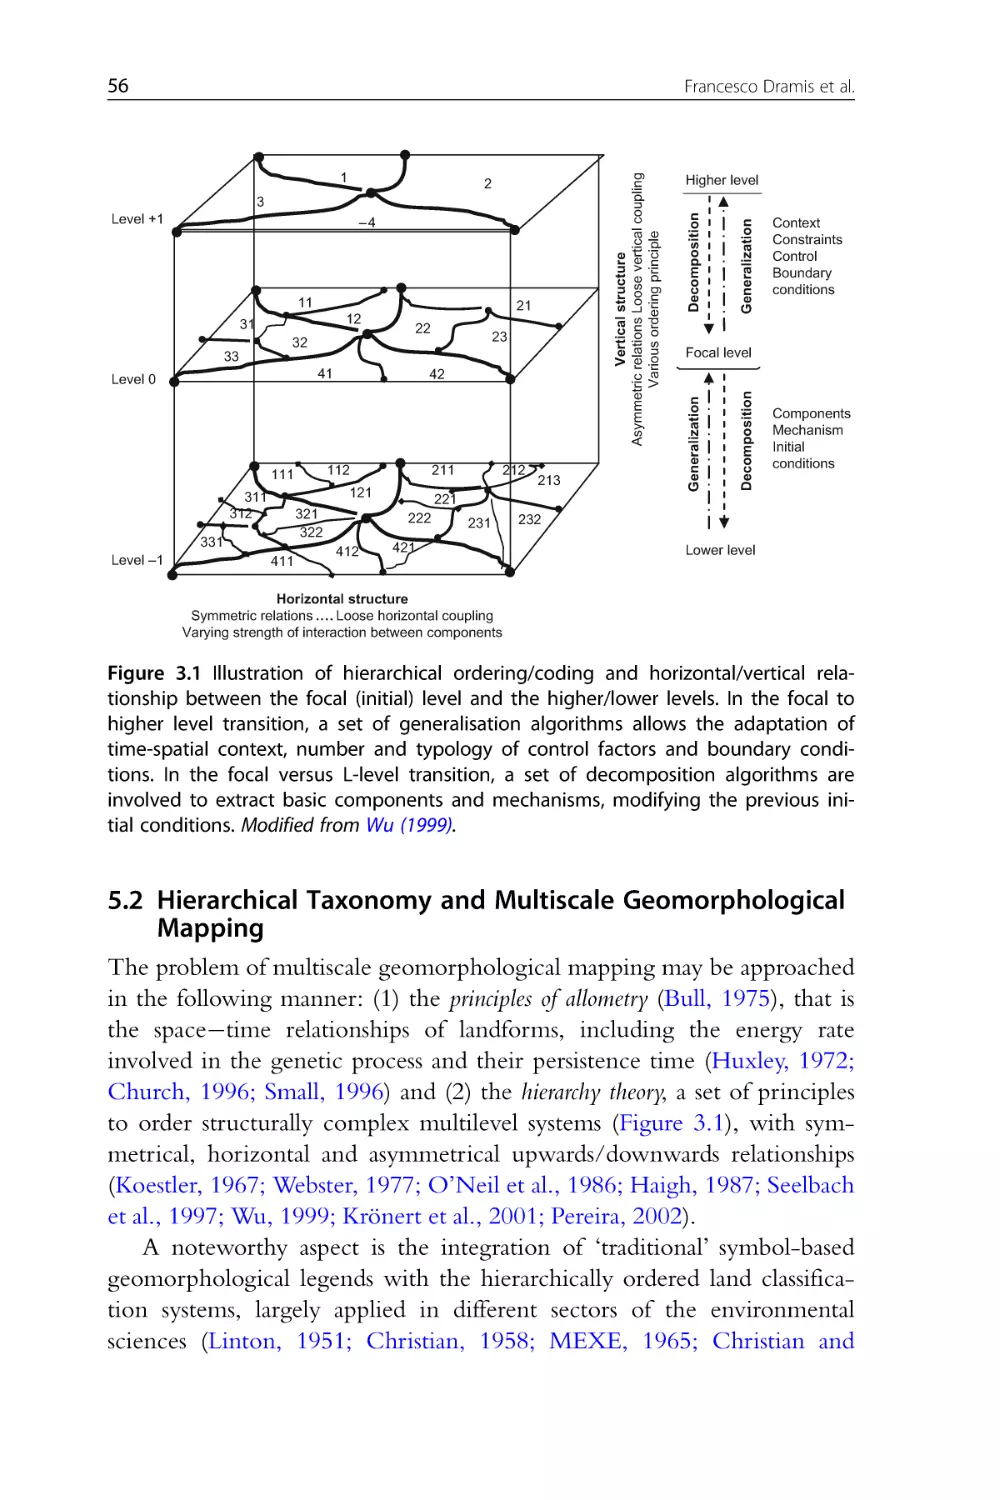 5.2 Hierarchical Taxonomy and Multiscale Geomorphological Mapping